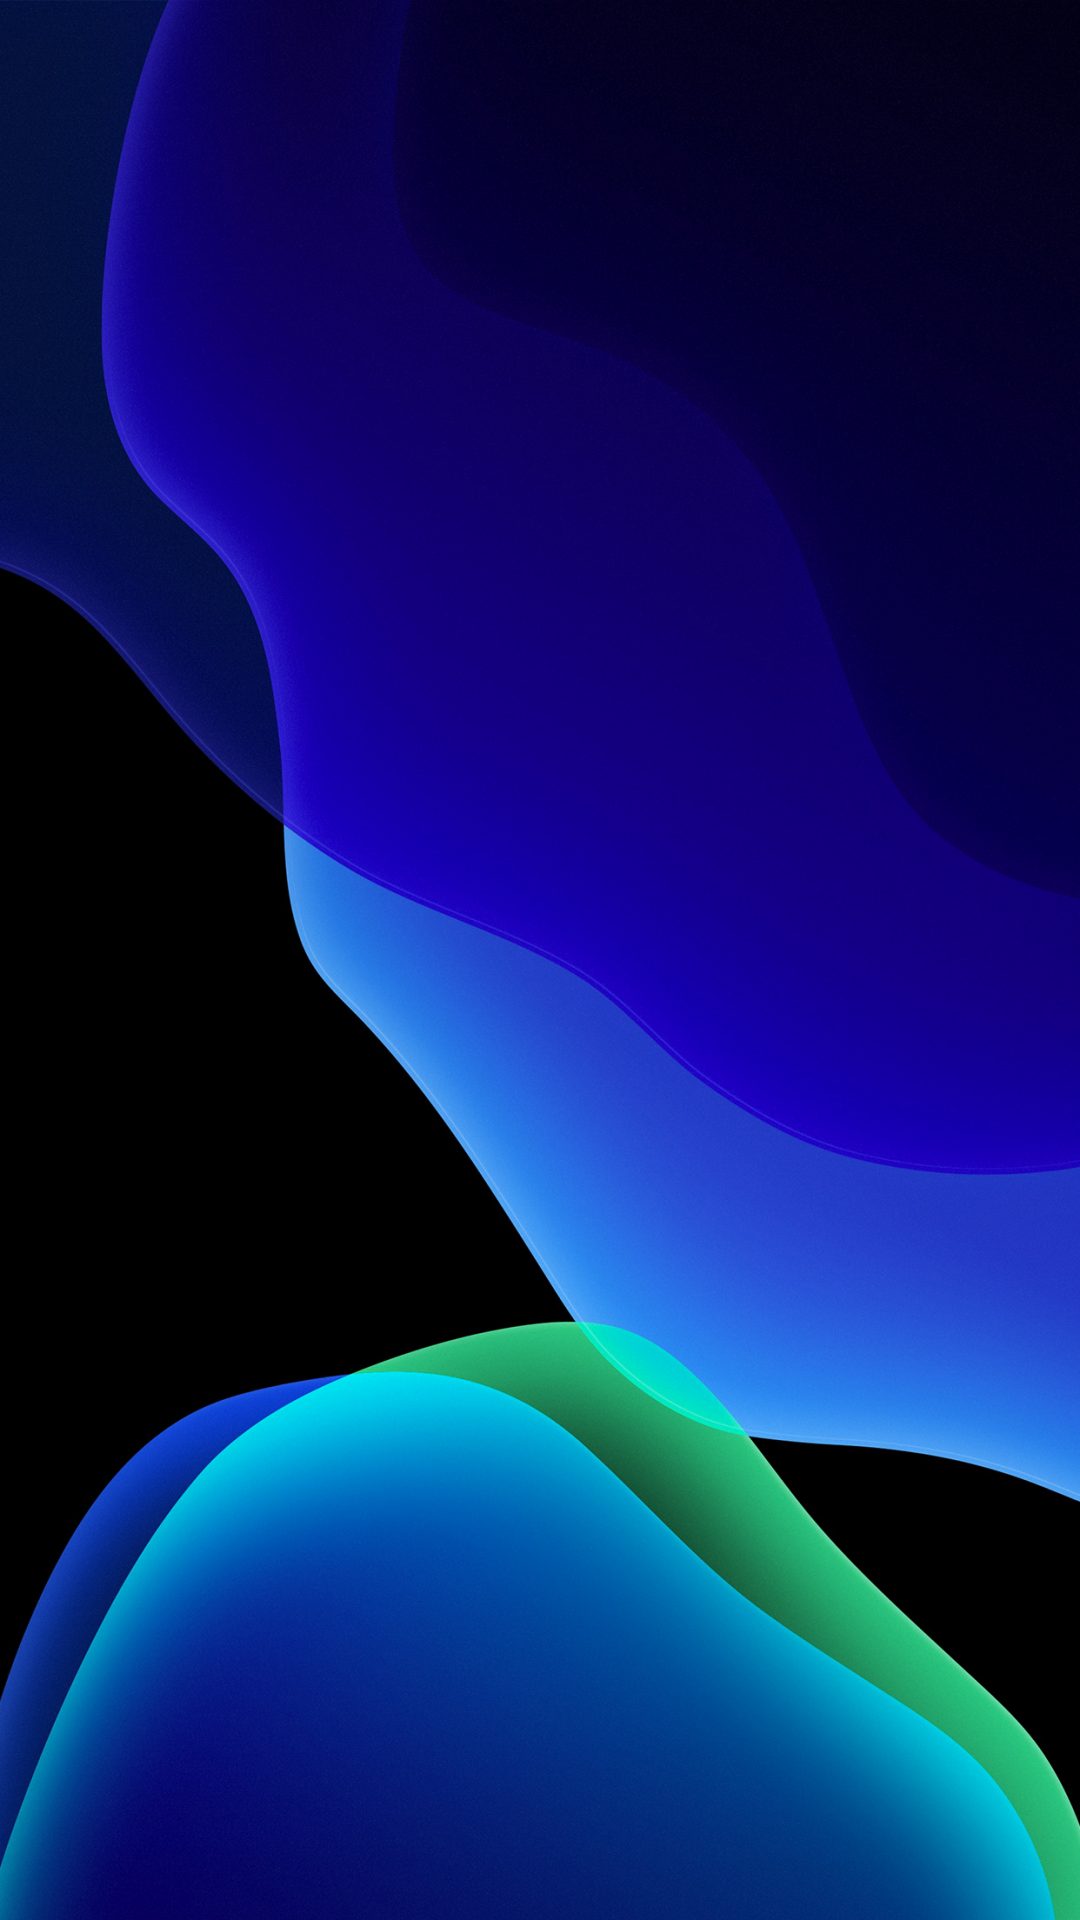 How To Get Ios S New Wallpaper For Your iPhone Right Now